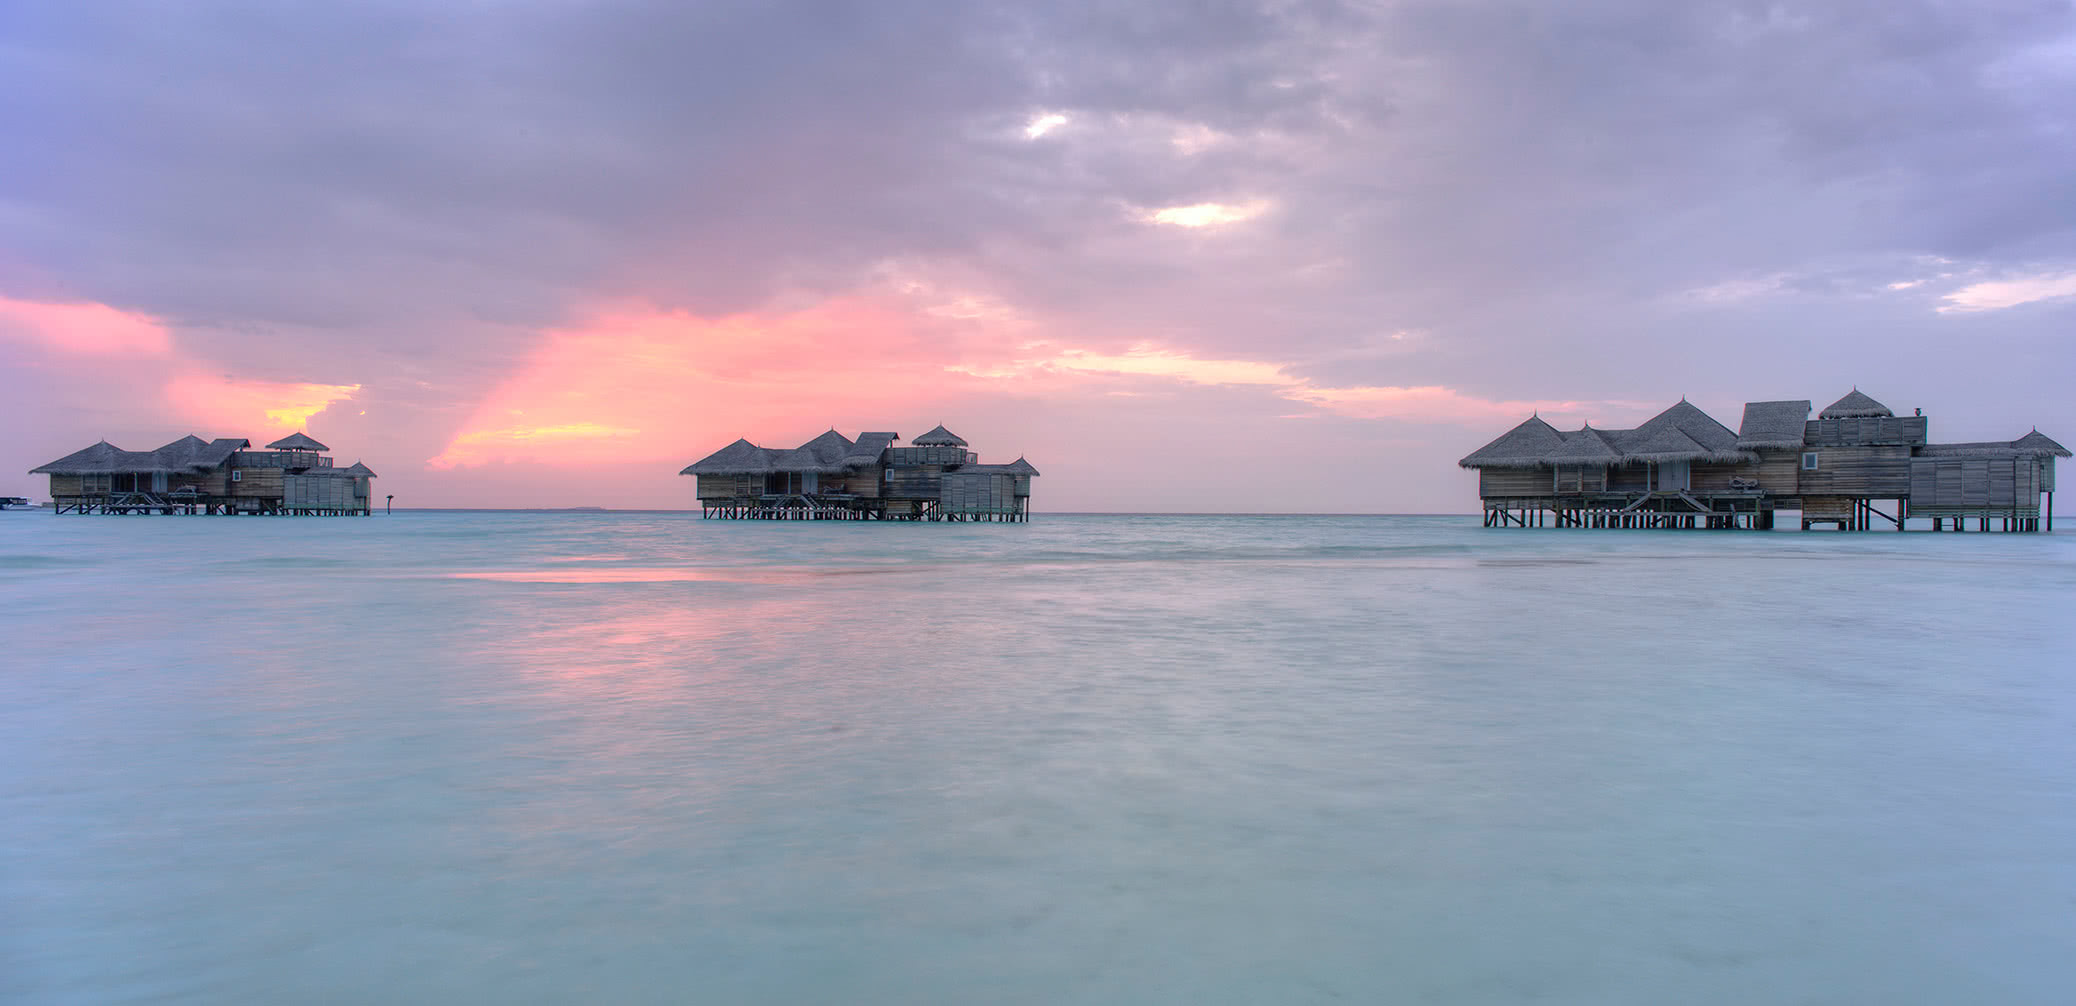 Top 10 Best Luxury Hotels & Resorts In The Maldives